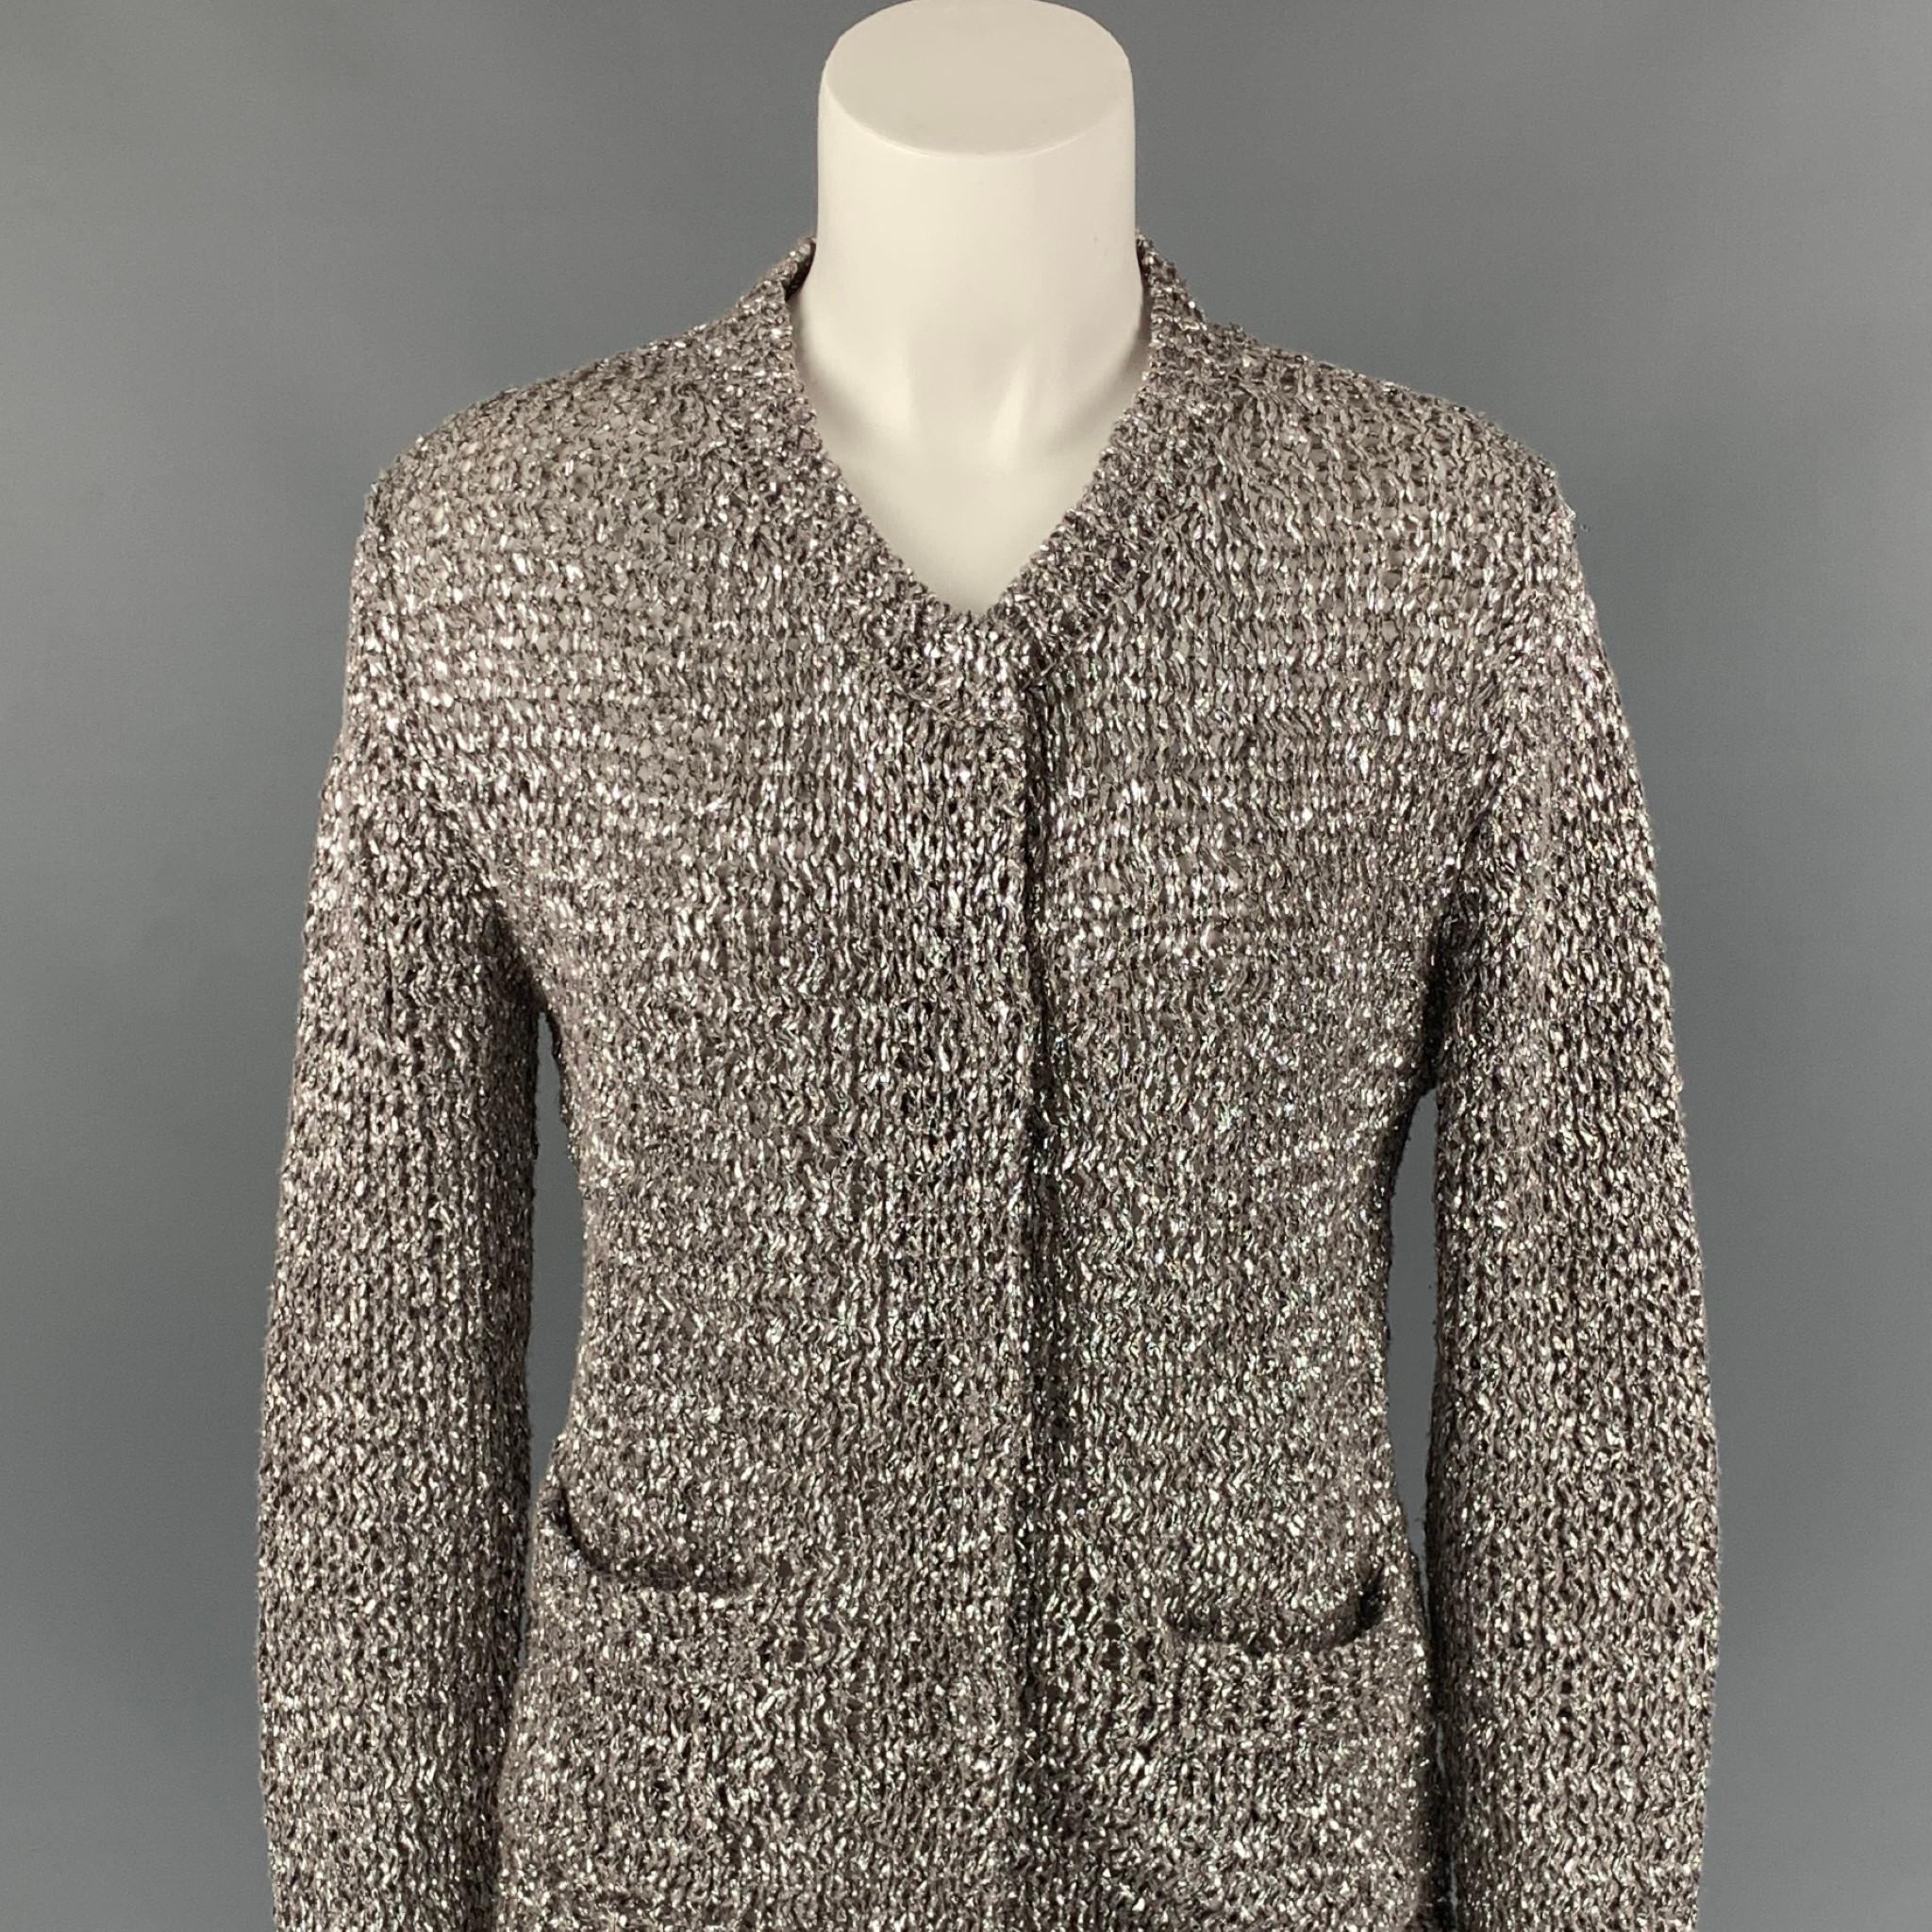 DRIES VAN NOTEN cardigan comes in a silver metallic knitted cotton / polyester featuring front pockets and a hidden snap button closure. Made in Belgium.

Very Good Pre-Owned Condition.
Marked: M

Measurements:

Shoulder: 16 in.
Bust: 36 in.
Sleeve: